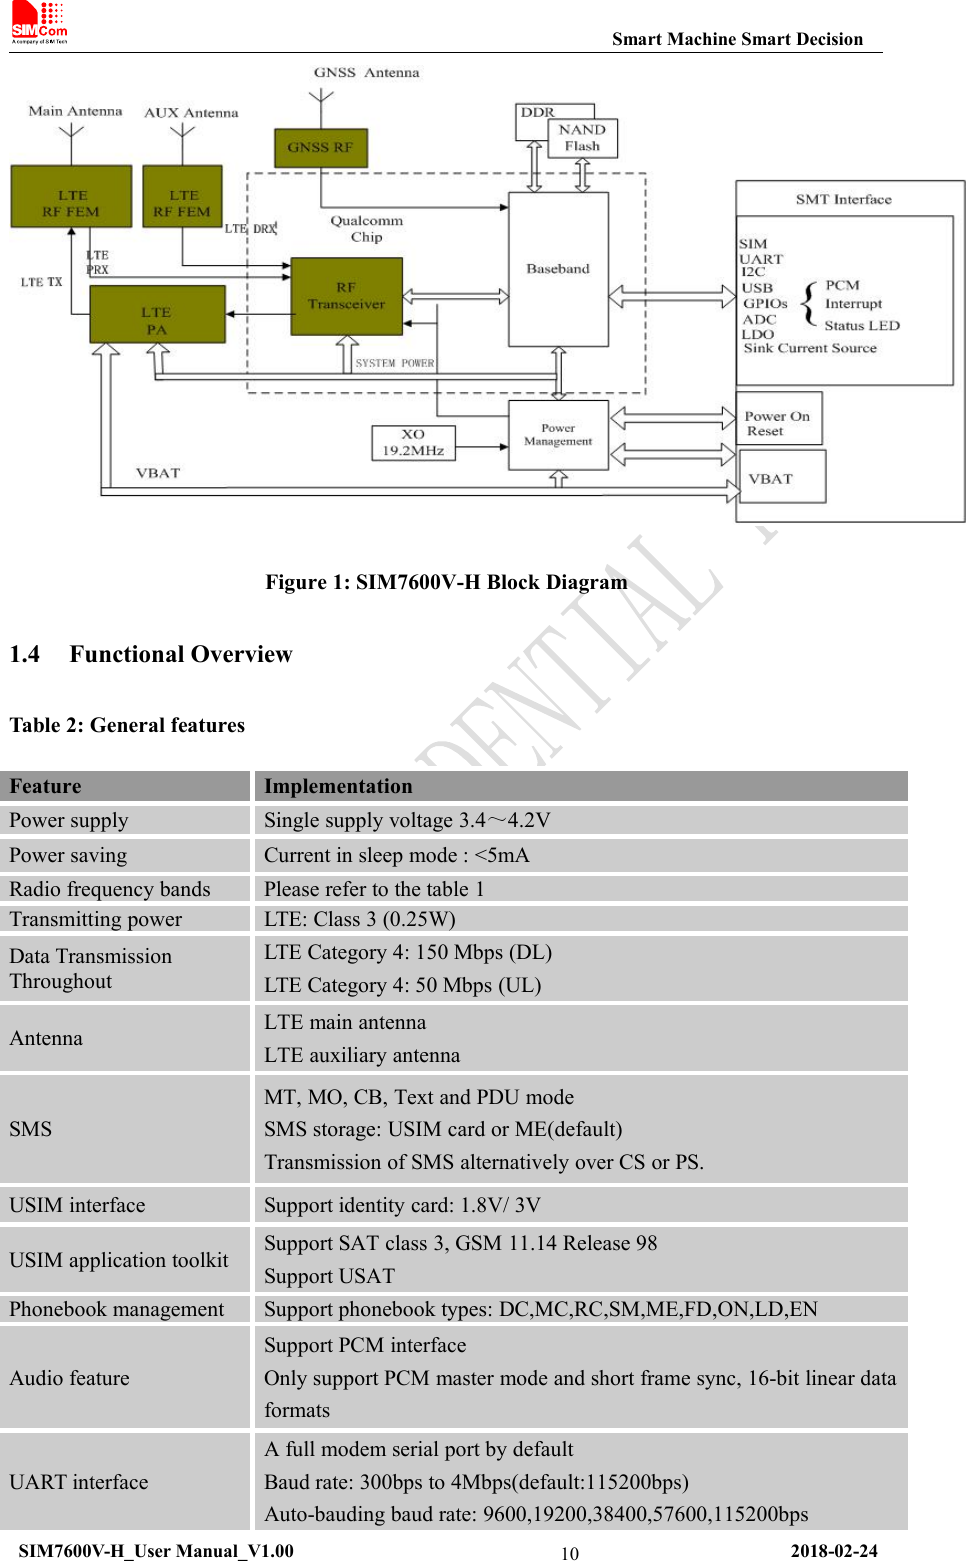 Smart Machine Smart DecisionSIM7600V-H_User Manual_V1.00 2018-02-2410Figure 1: SIM7600V-H Block Diagram1.4 Functional OverviewTable 2: General featuresFeatureImplementationPower supplySingle supply voltage 3.4～4.2VPower savingCurrent in sleep mode : &lt;5mARadio frequency bandsPlease refer to the table 1Transmitting powerLTE: Class 3 (0.25W)Data TransmissionThroughoutLTE Category 4: 150 Mbps (DL)LTE Category 4: 50 Mbps (UL)AntennaLTE main antennaLTE auxiliary antennaSMSMT, MO, CB, Text and PDU modeSMS storage: USIM card or ME(default)Transmission of SMS alternatively over CS or PS.USIM interfaceSupport identity card: 1.8V/ 3VUSIM application toolkitSupport SAT class 3, GSM 11.14 Release 98Support USATPhonebook managementSupport phonebook types: DC,MC,RC,SM,ME,FD,ON,LD,ENAudio featureSupport PCM interfaceOnly support PCM master mode and short frame sync, 16-bit linear dataformatsUART interfaceA full modem serial port by defaultBaud rate: 300bps to 4Mbps(default:115200bps)Auto-bauding baud rate: 9600,19200,38400,57600,115200bps